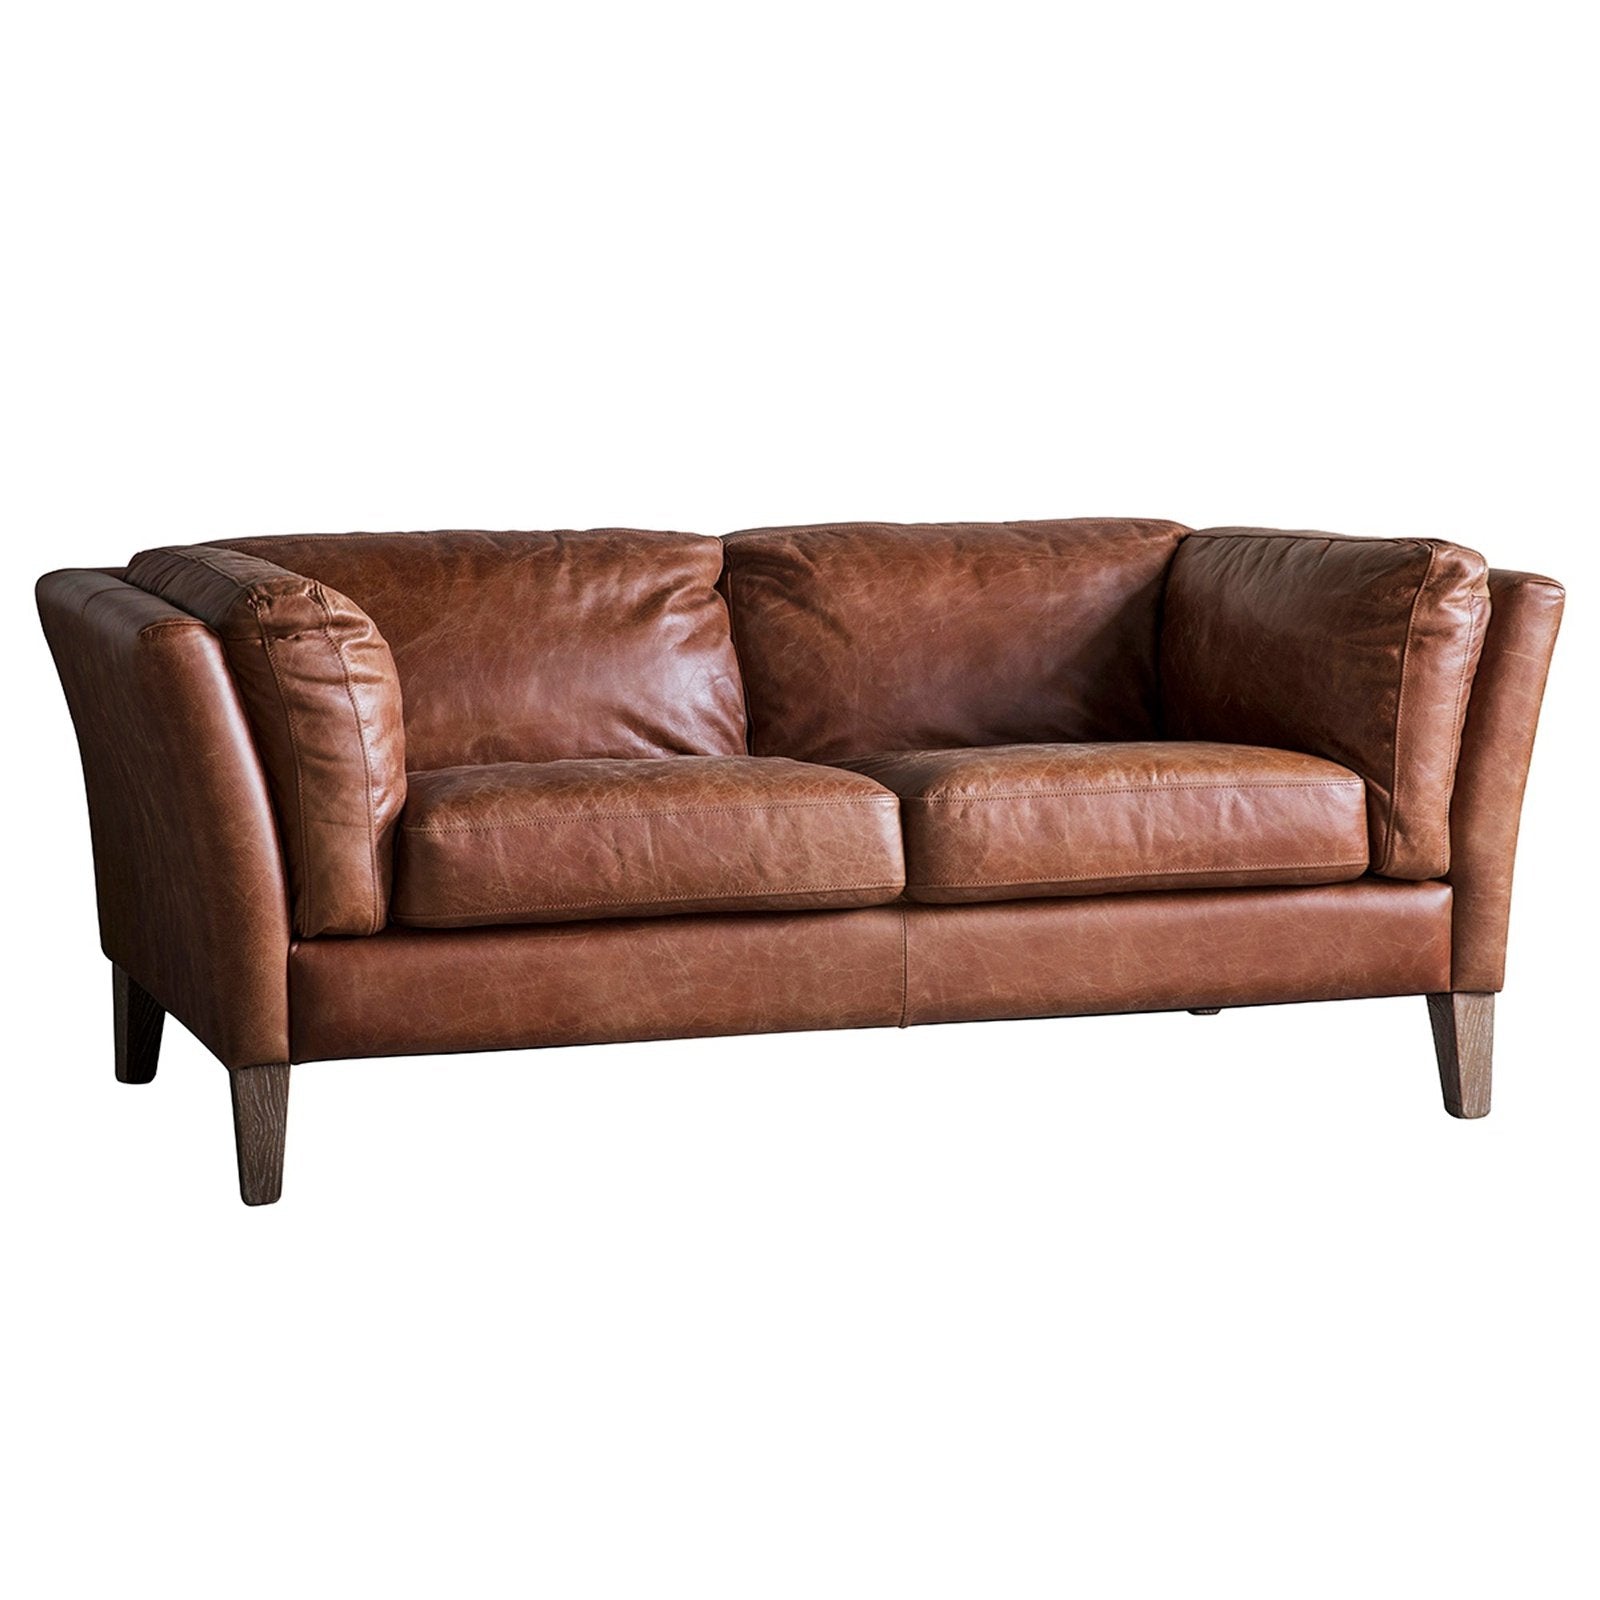 Ebury and Enfield 2 Seater Sofa